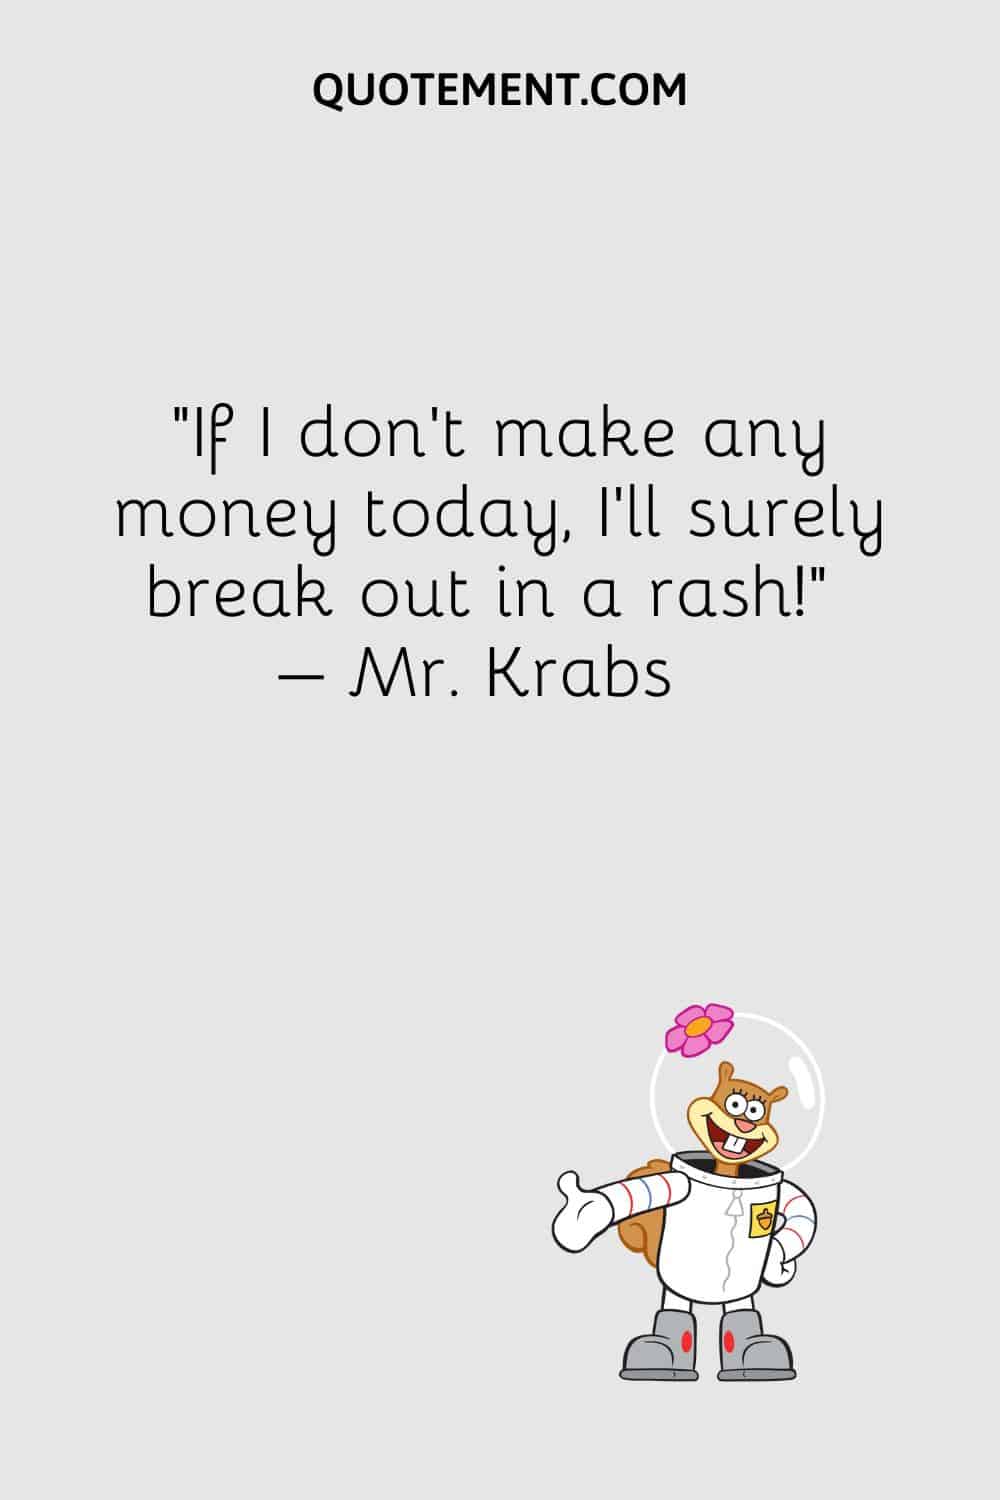 “If I don’t make any money today, I’ll surely break out in a rash!” – Mr. Krabs